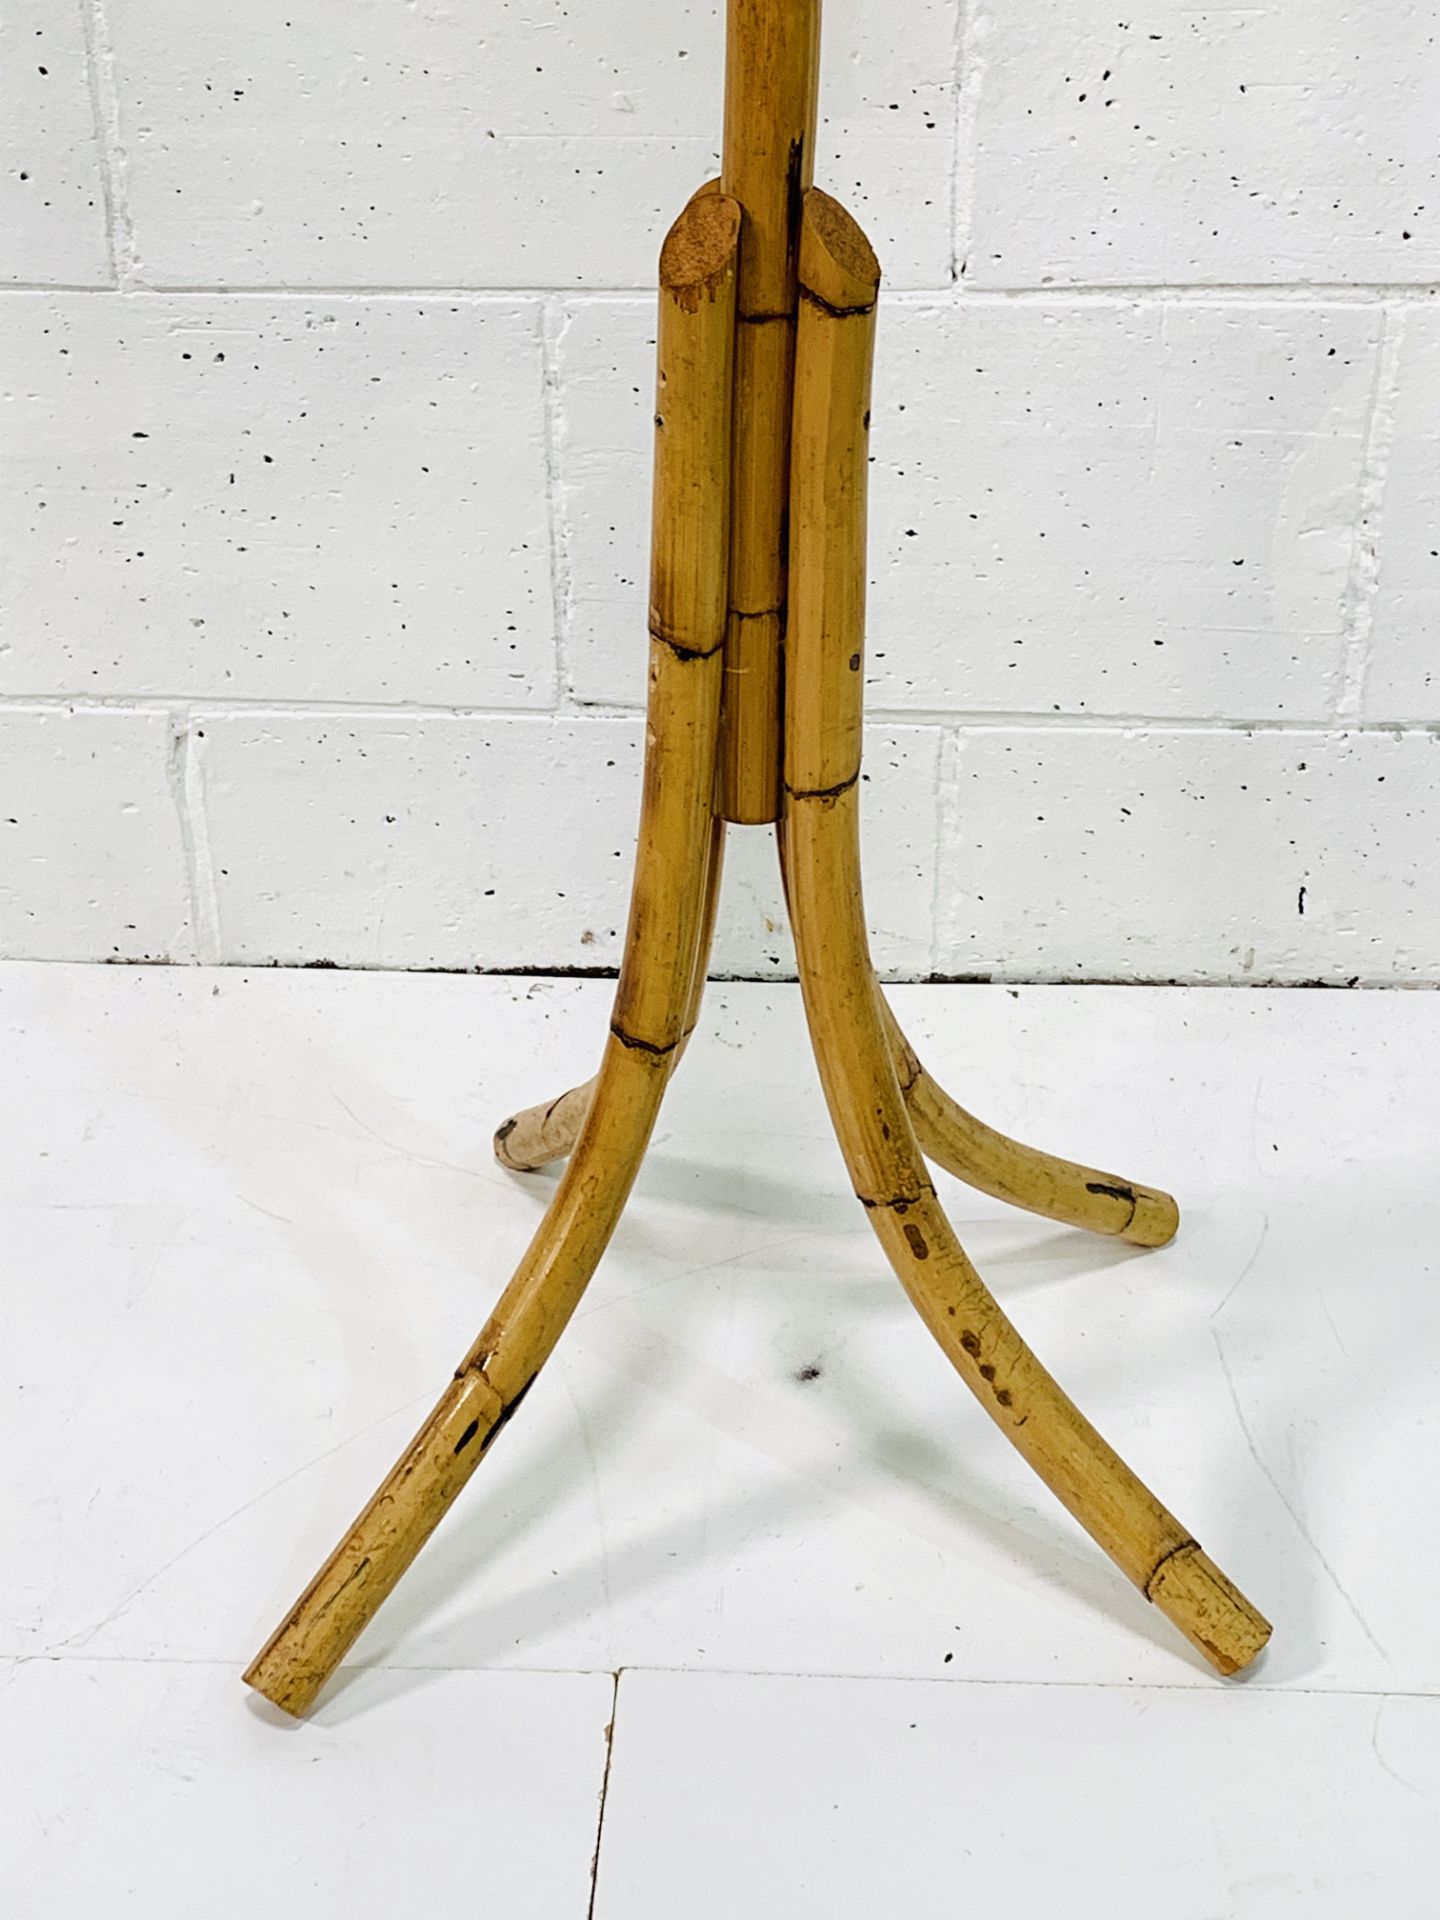 Bamboo hat and coat stand. - Image 3 of 3